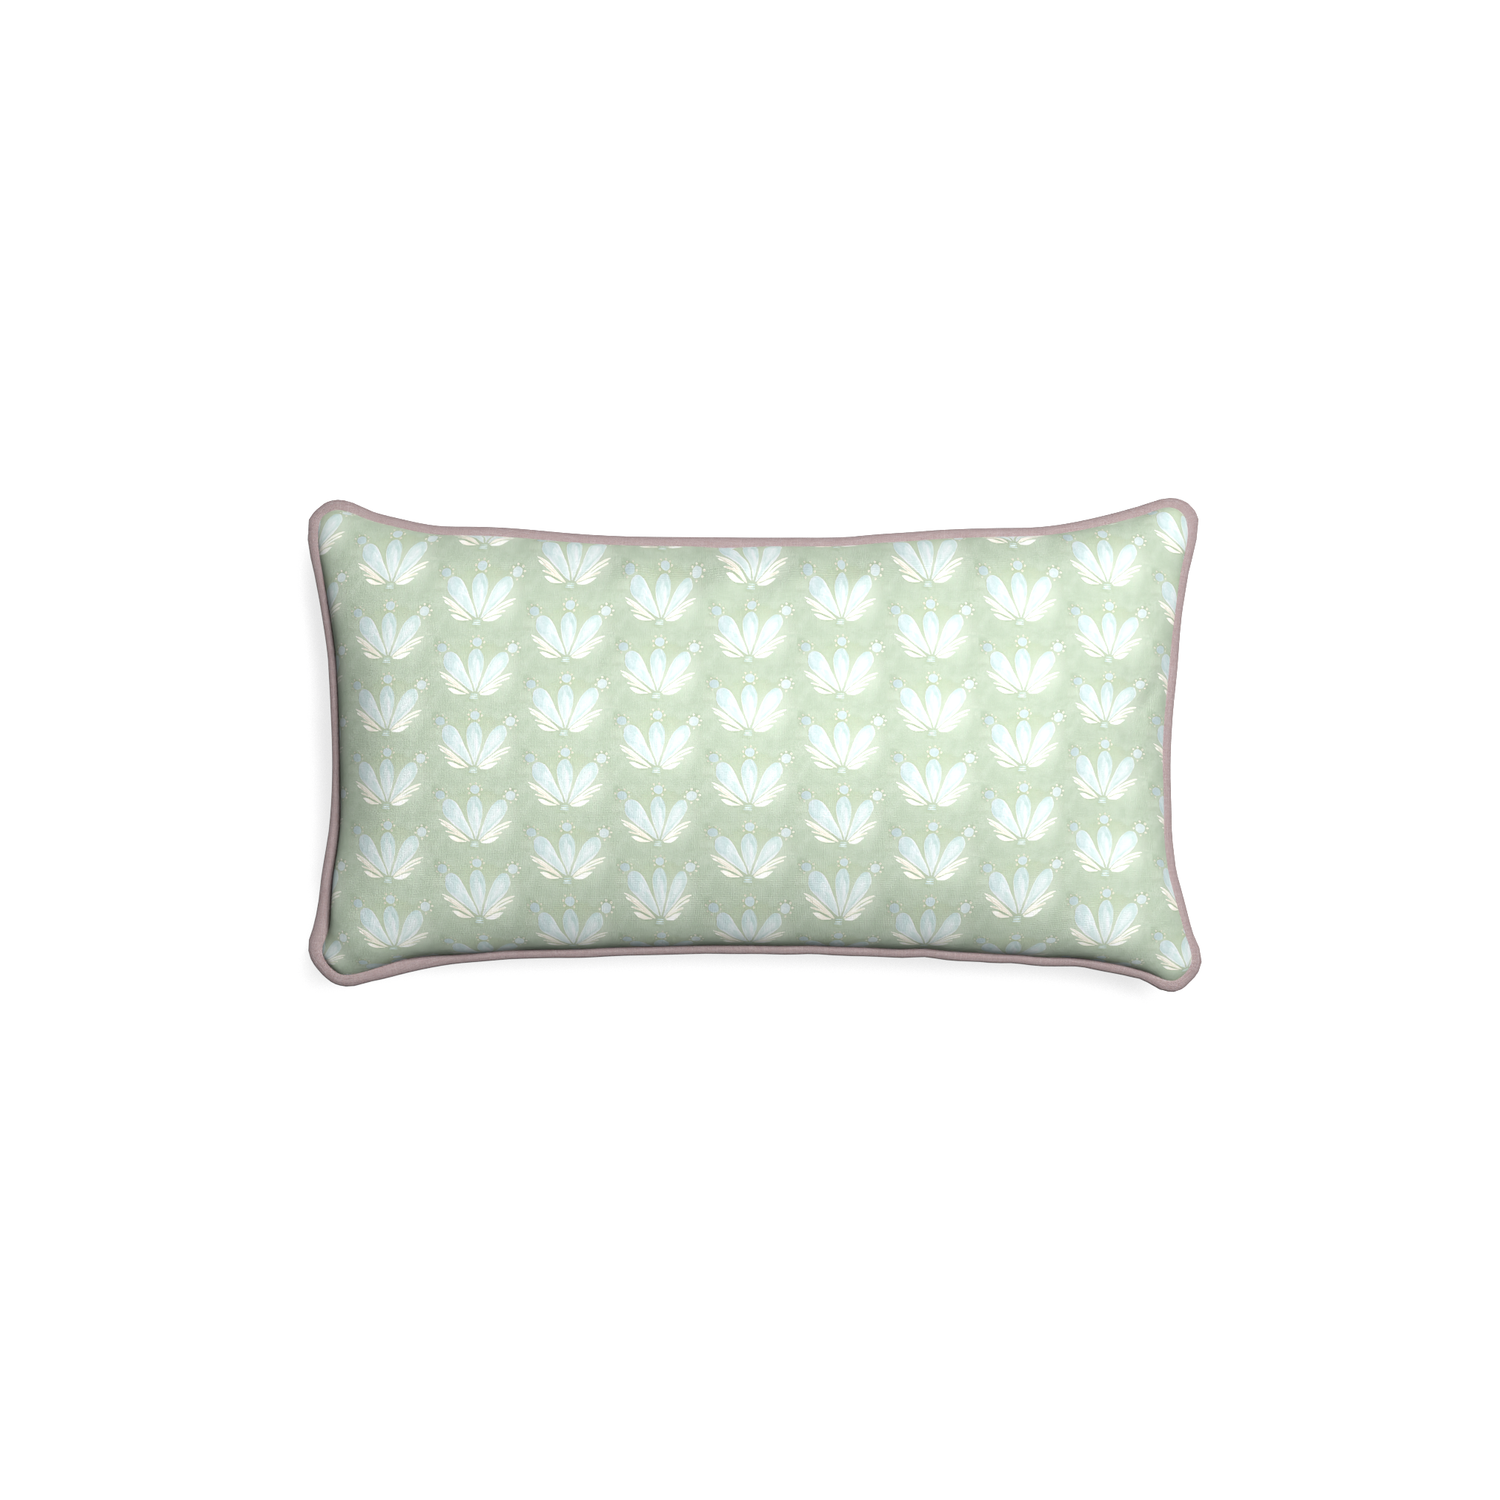 Petite-lumbar serena sea salt custom blue & green floral drop repeatpillow with orchid piping on white background